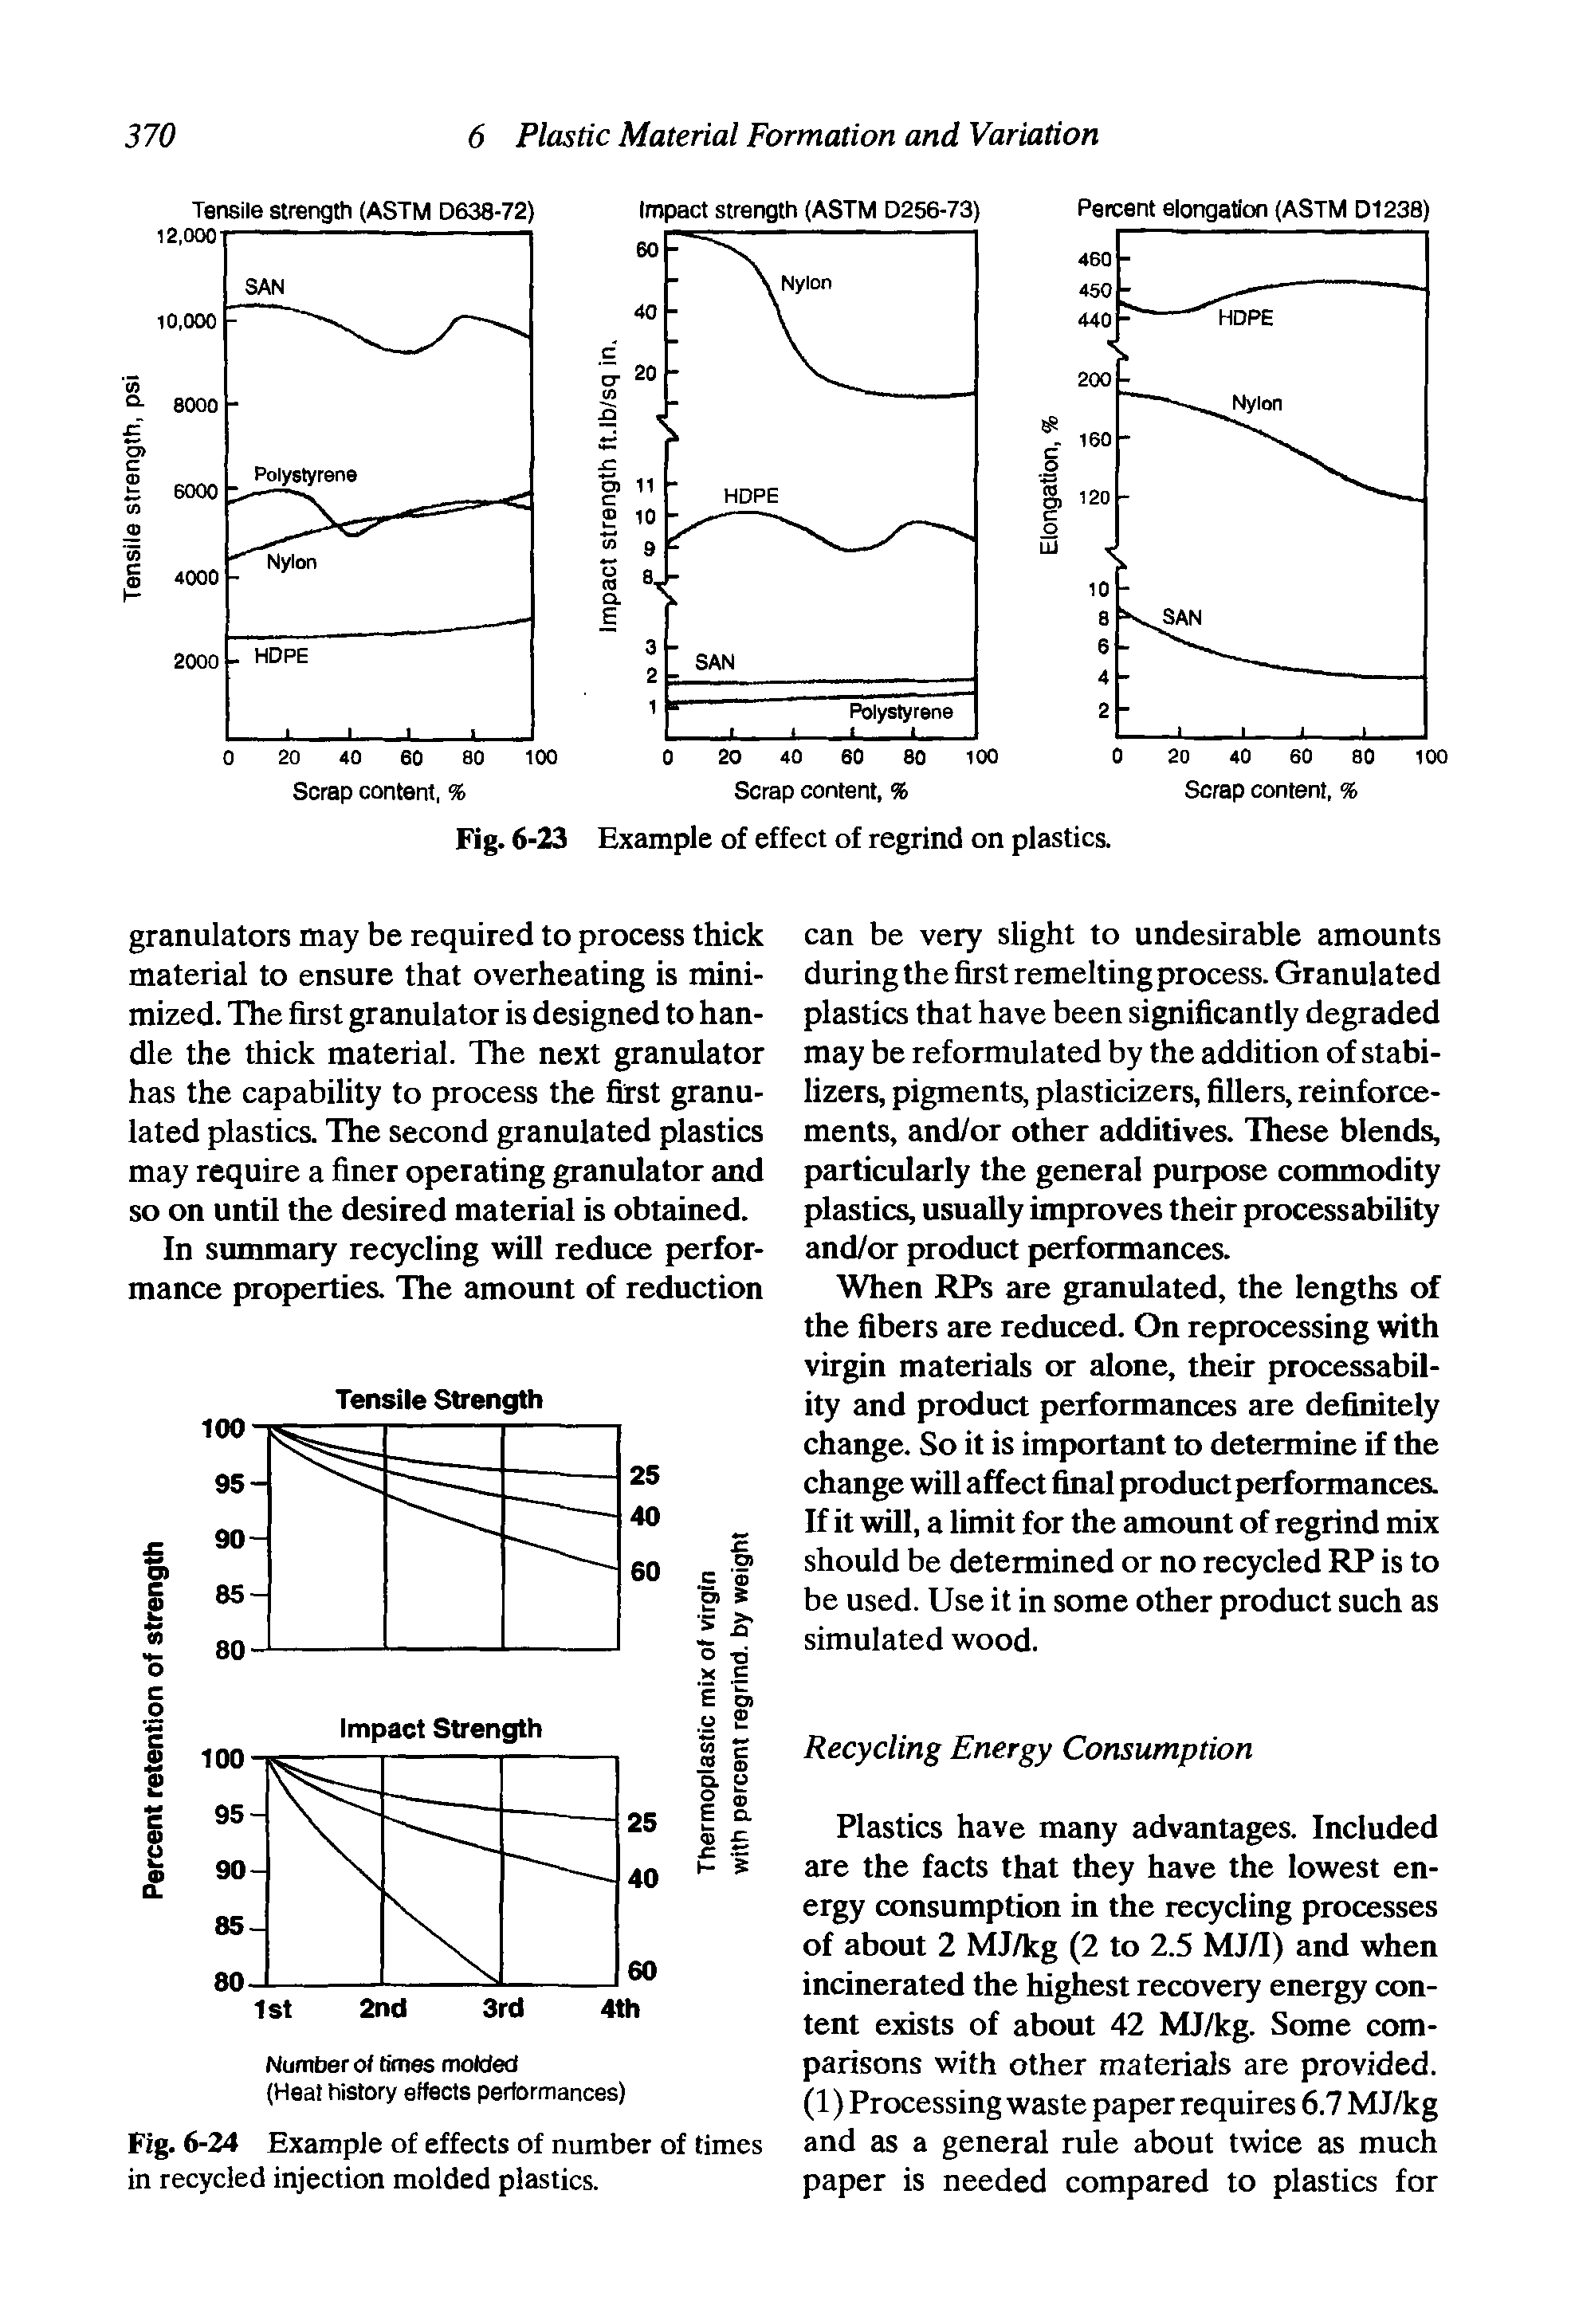 Fig. 6-24 Example of effects of number of times in recycled injection molded plastics.